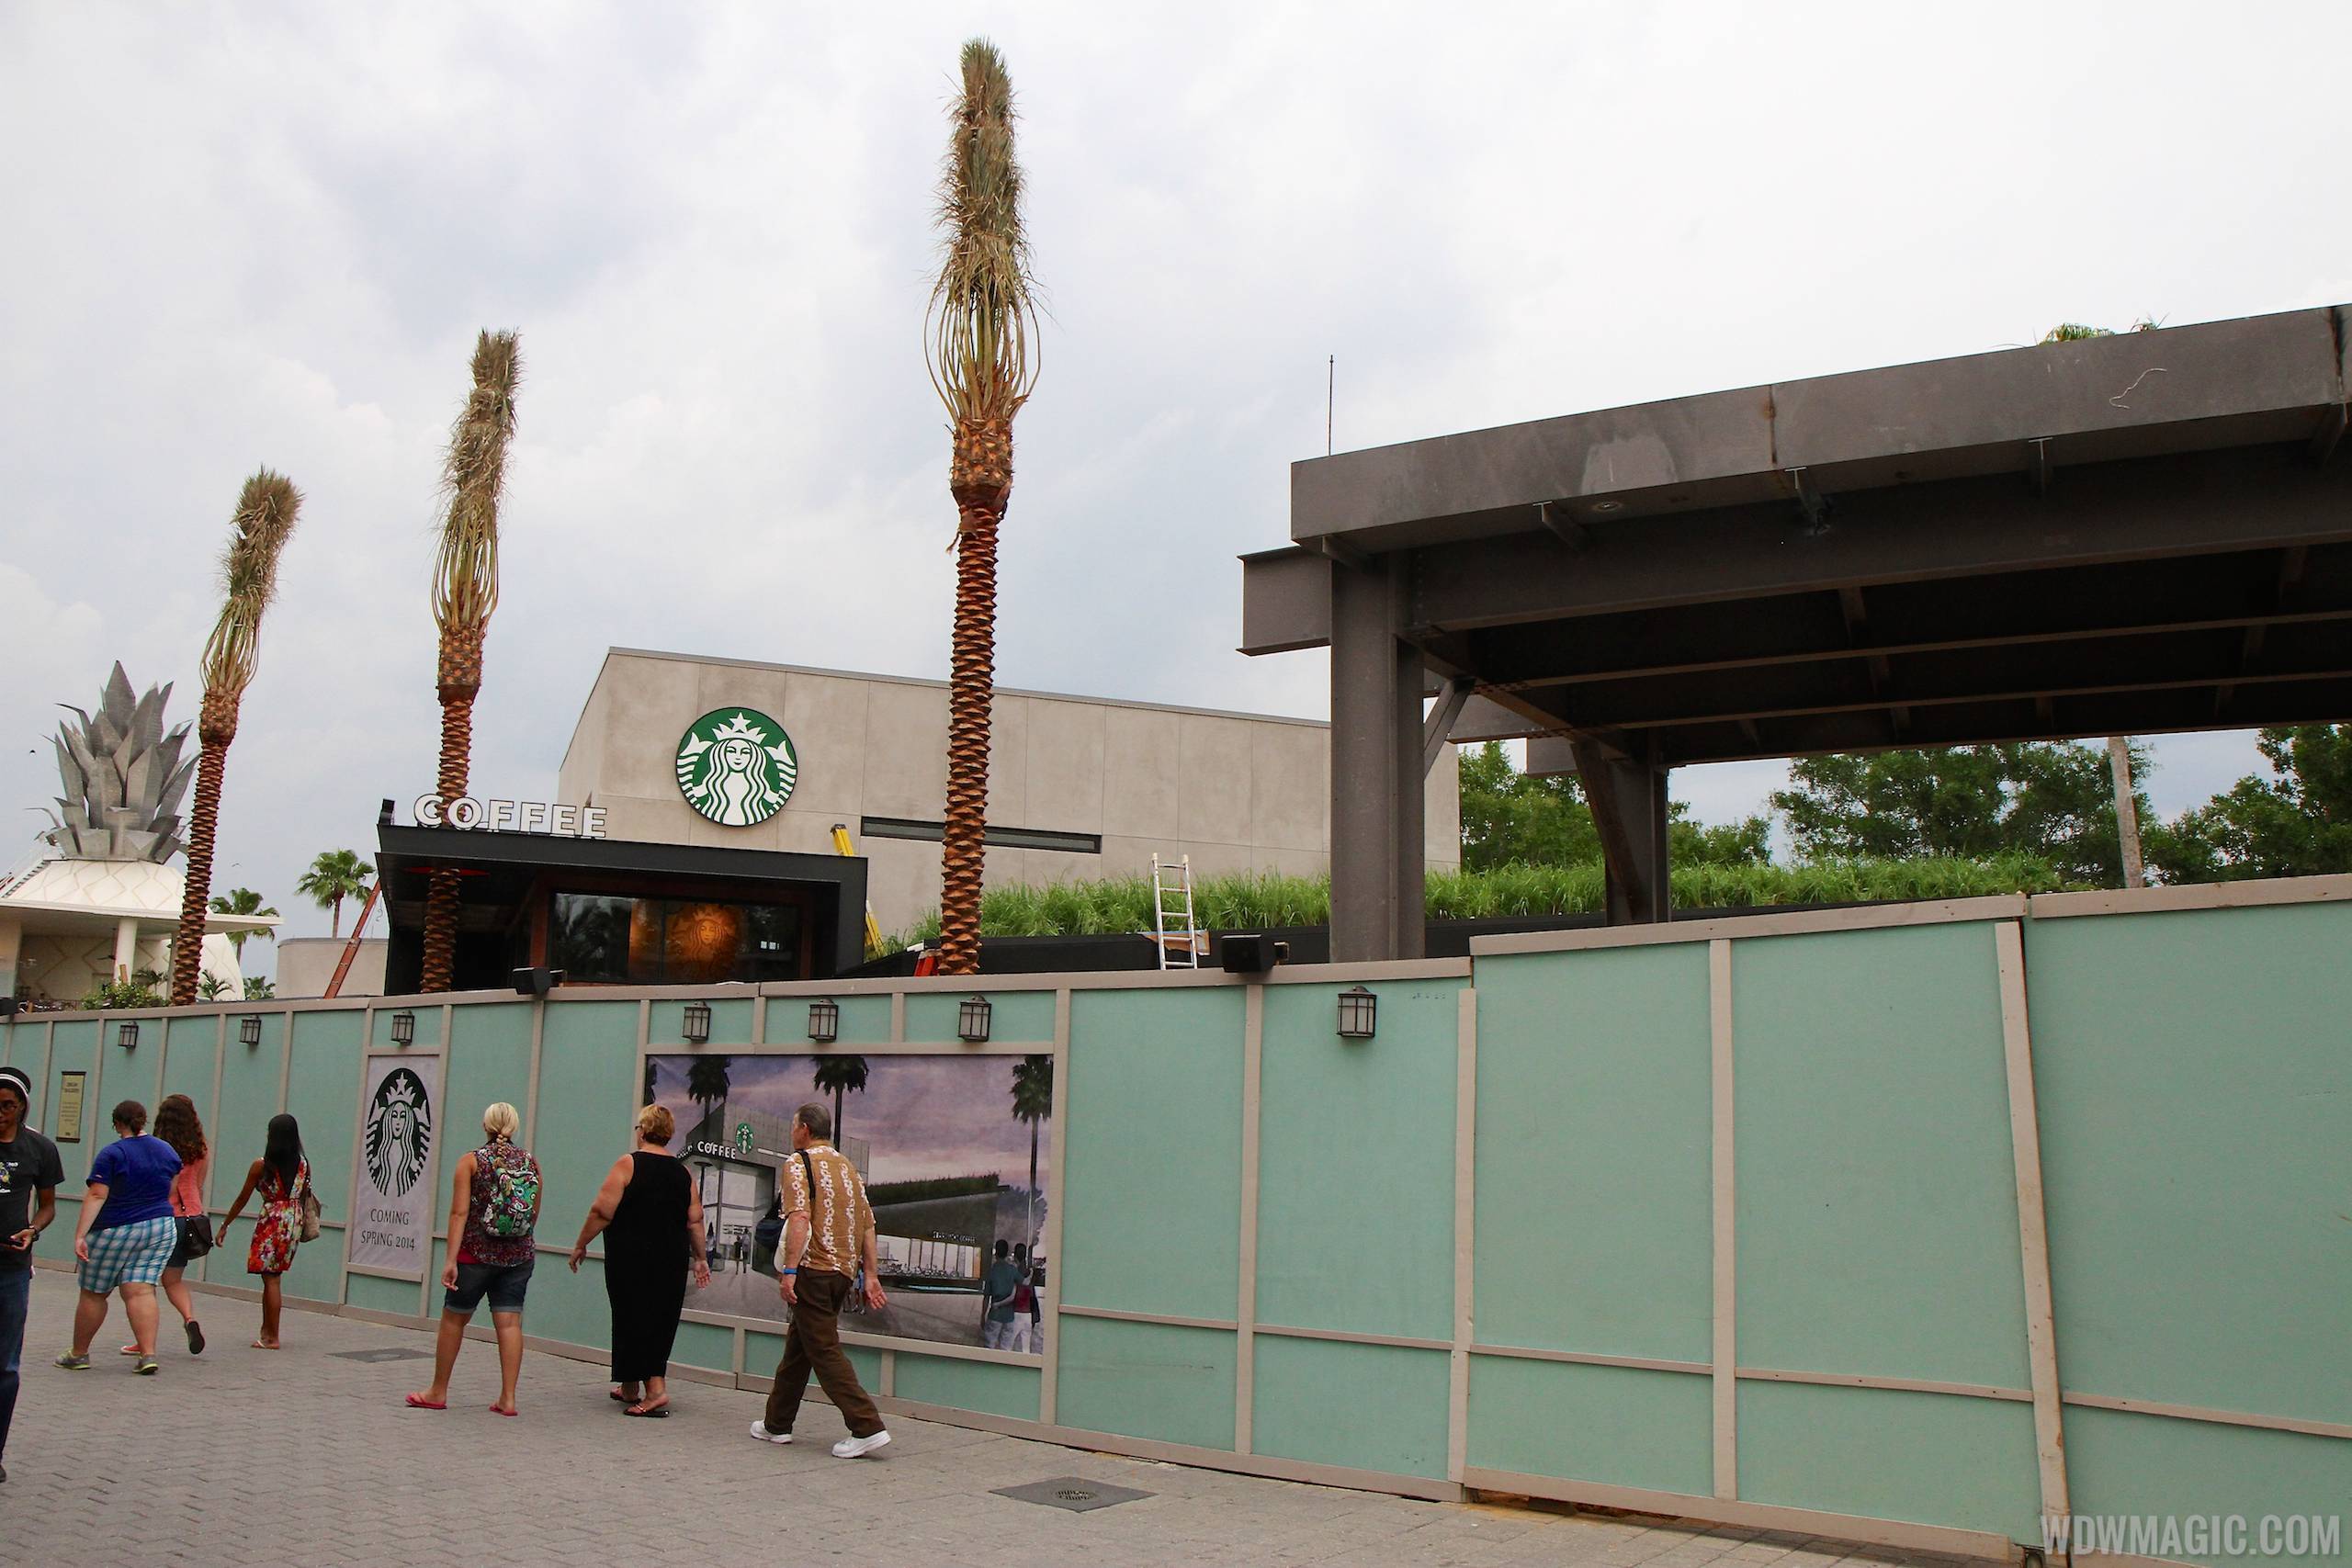 PHOTOS - Signs up as Starbucks West Side nears opening